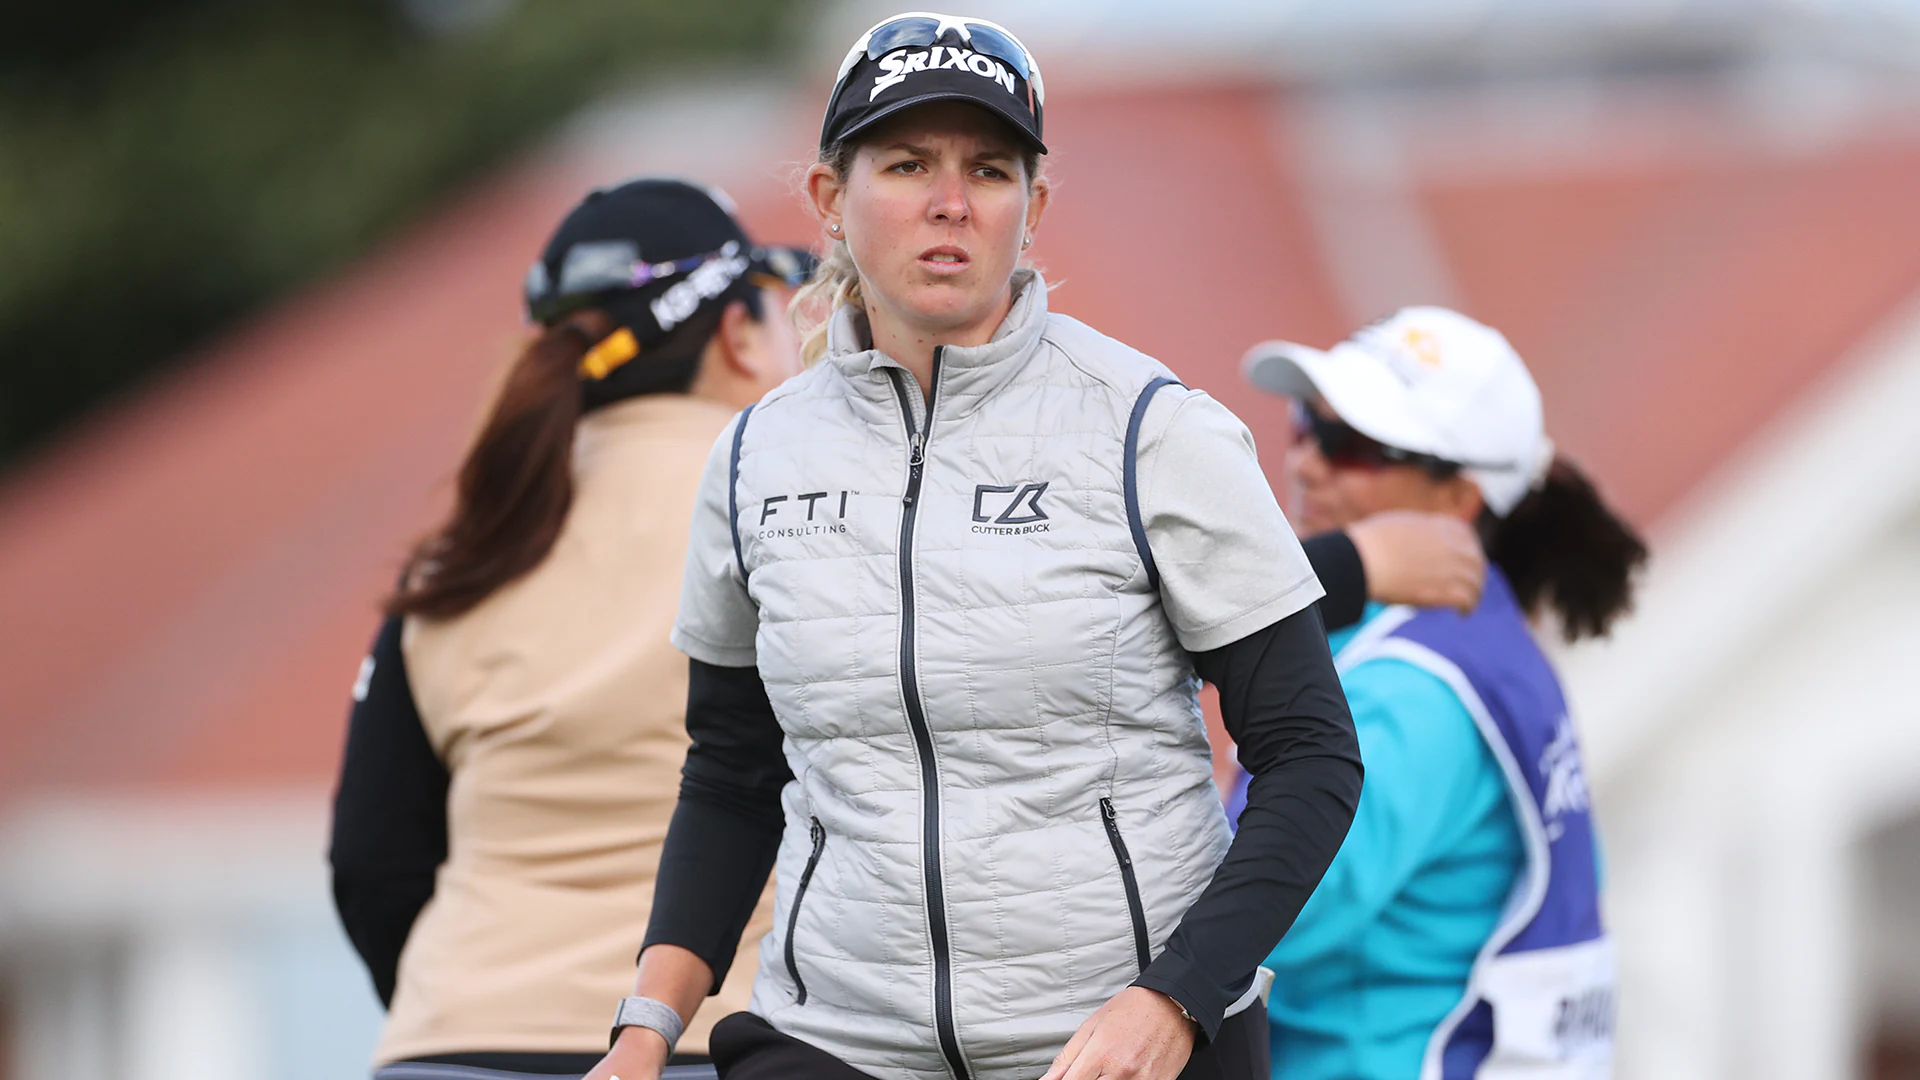 Career day, big lead, little comfort as Ashleigh Buhai eyes first major at 2022 AIG Women’s Open